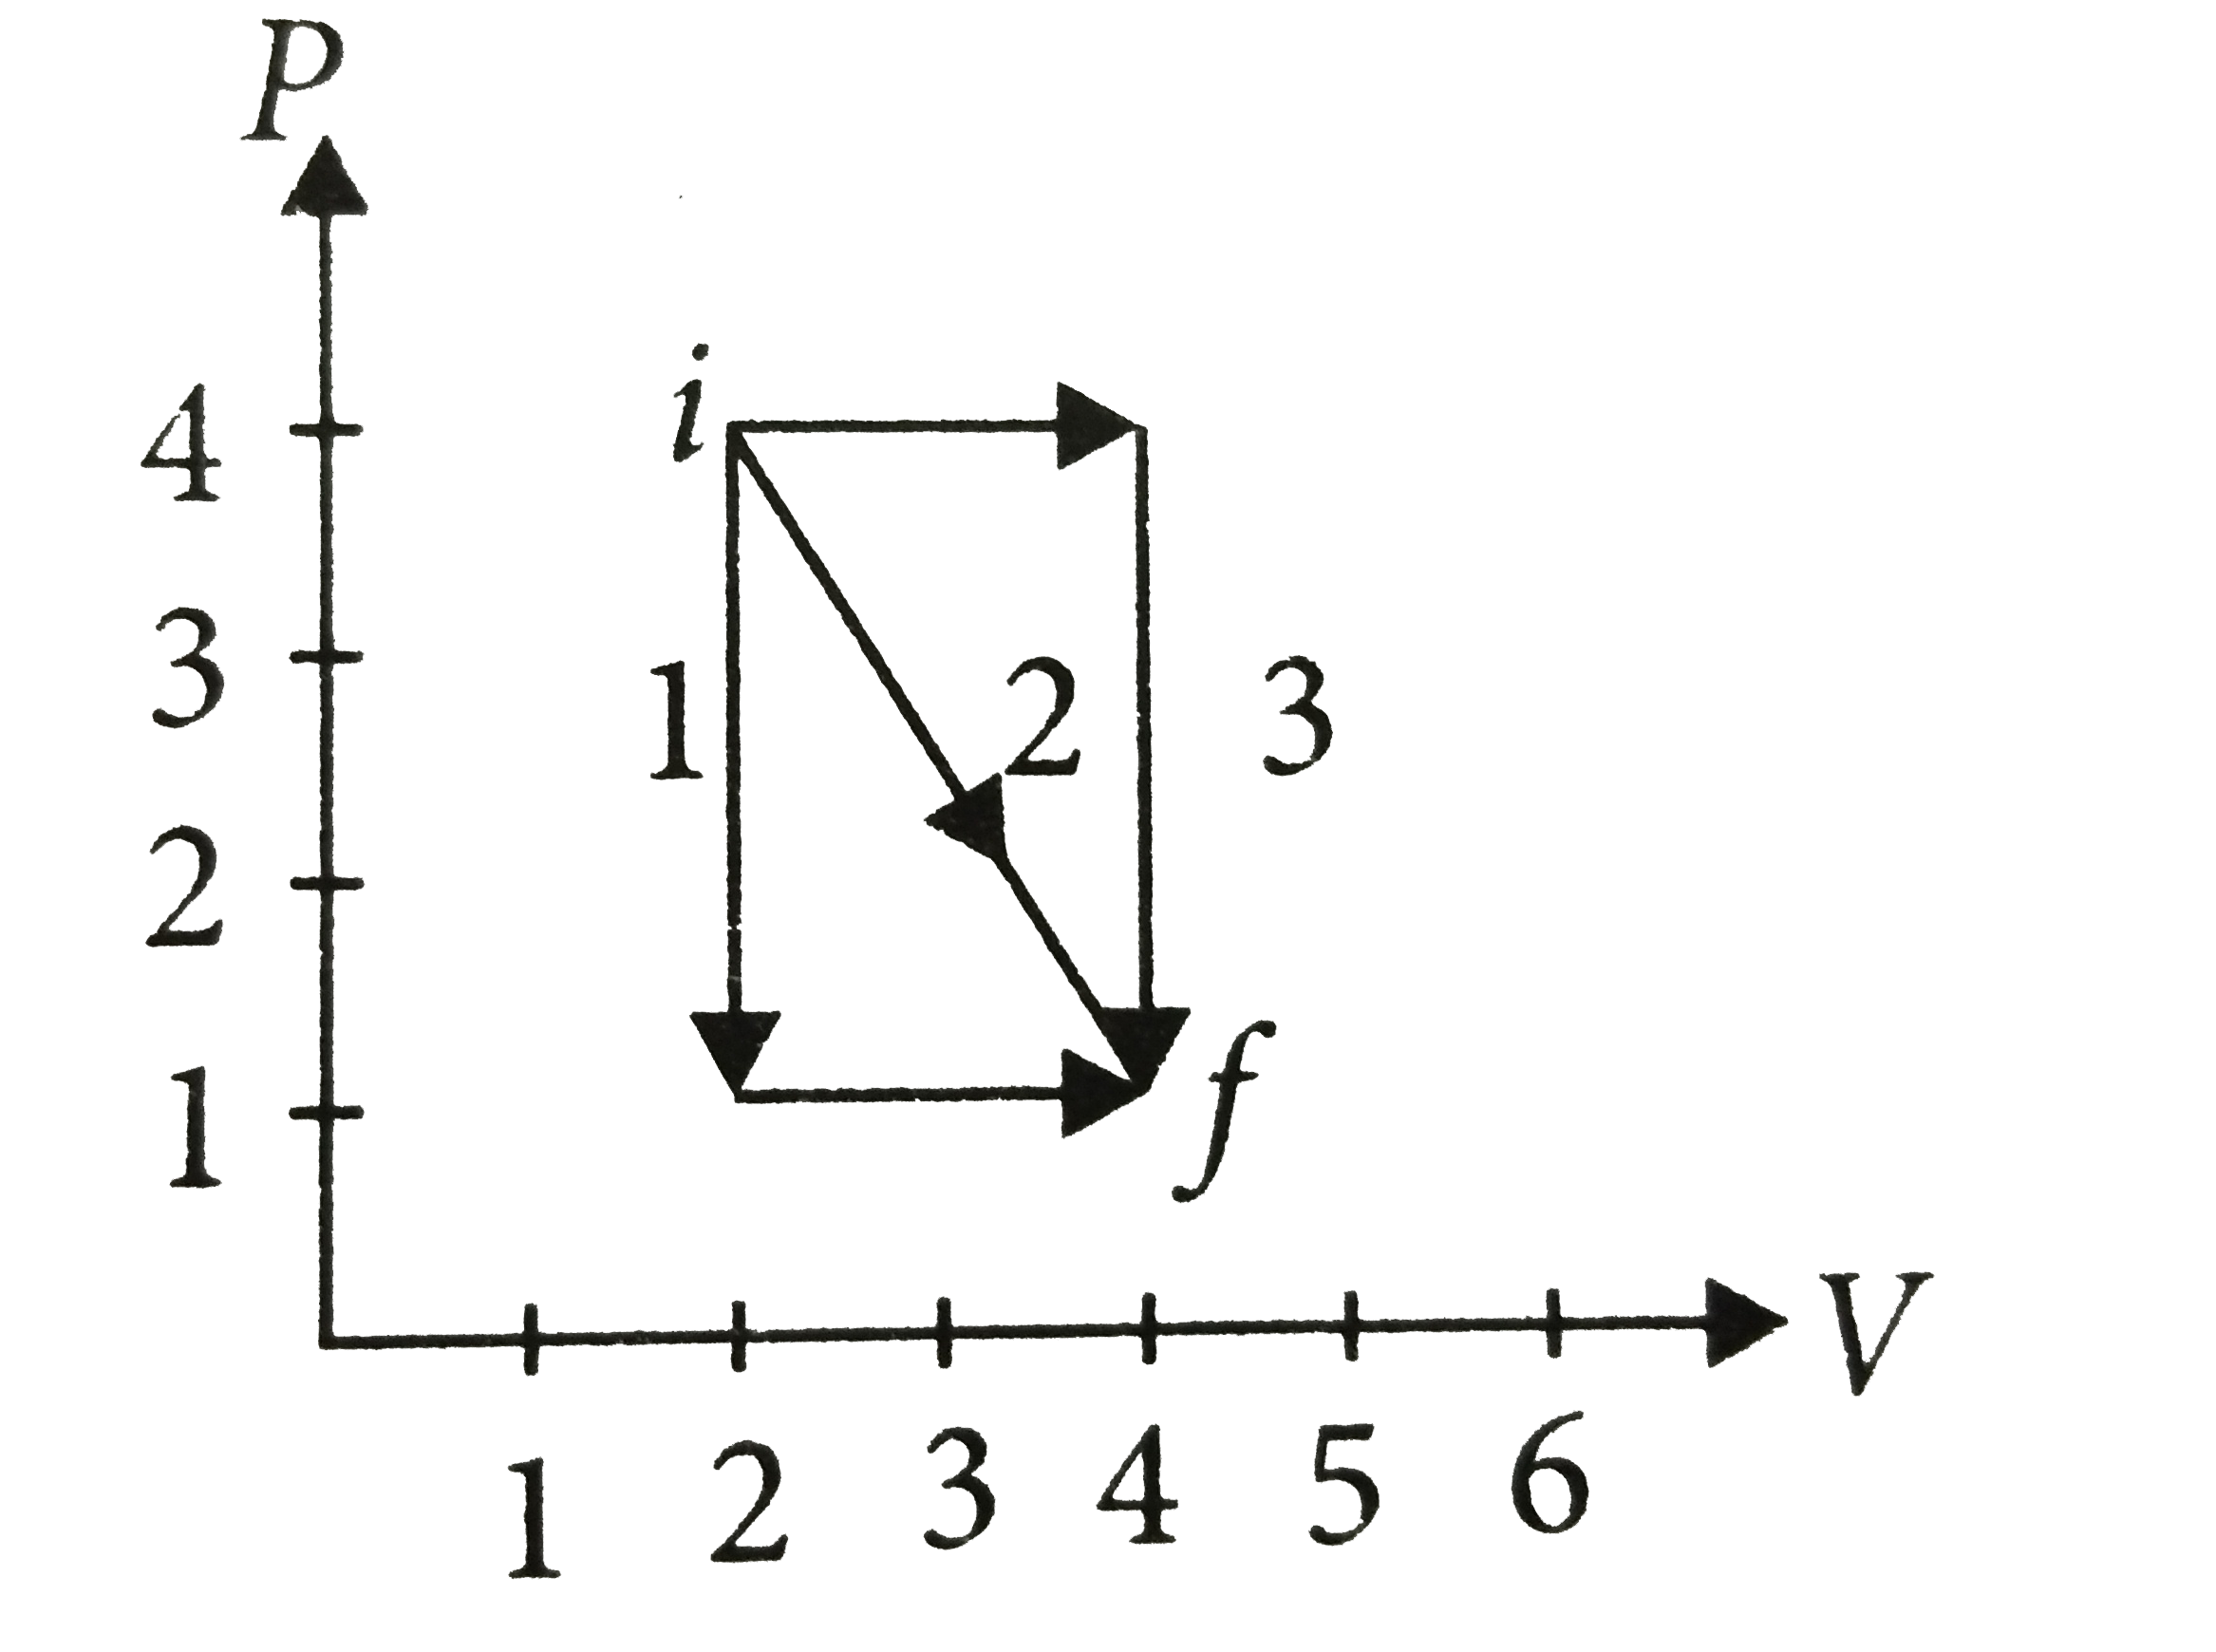 A gas expands from i to f along the three paths indicated. The work done along the three paths denoted by W1, W2 and W3 have the relationship